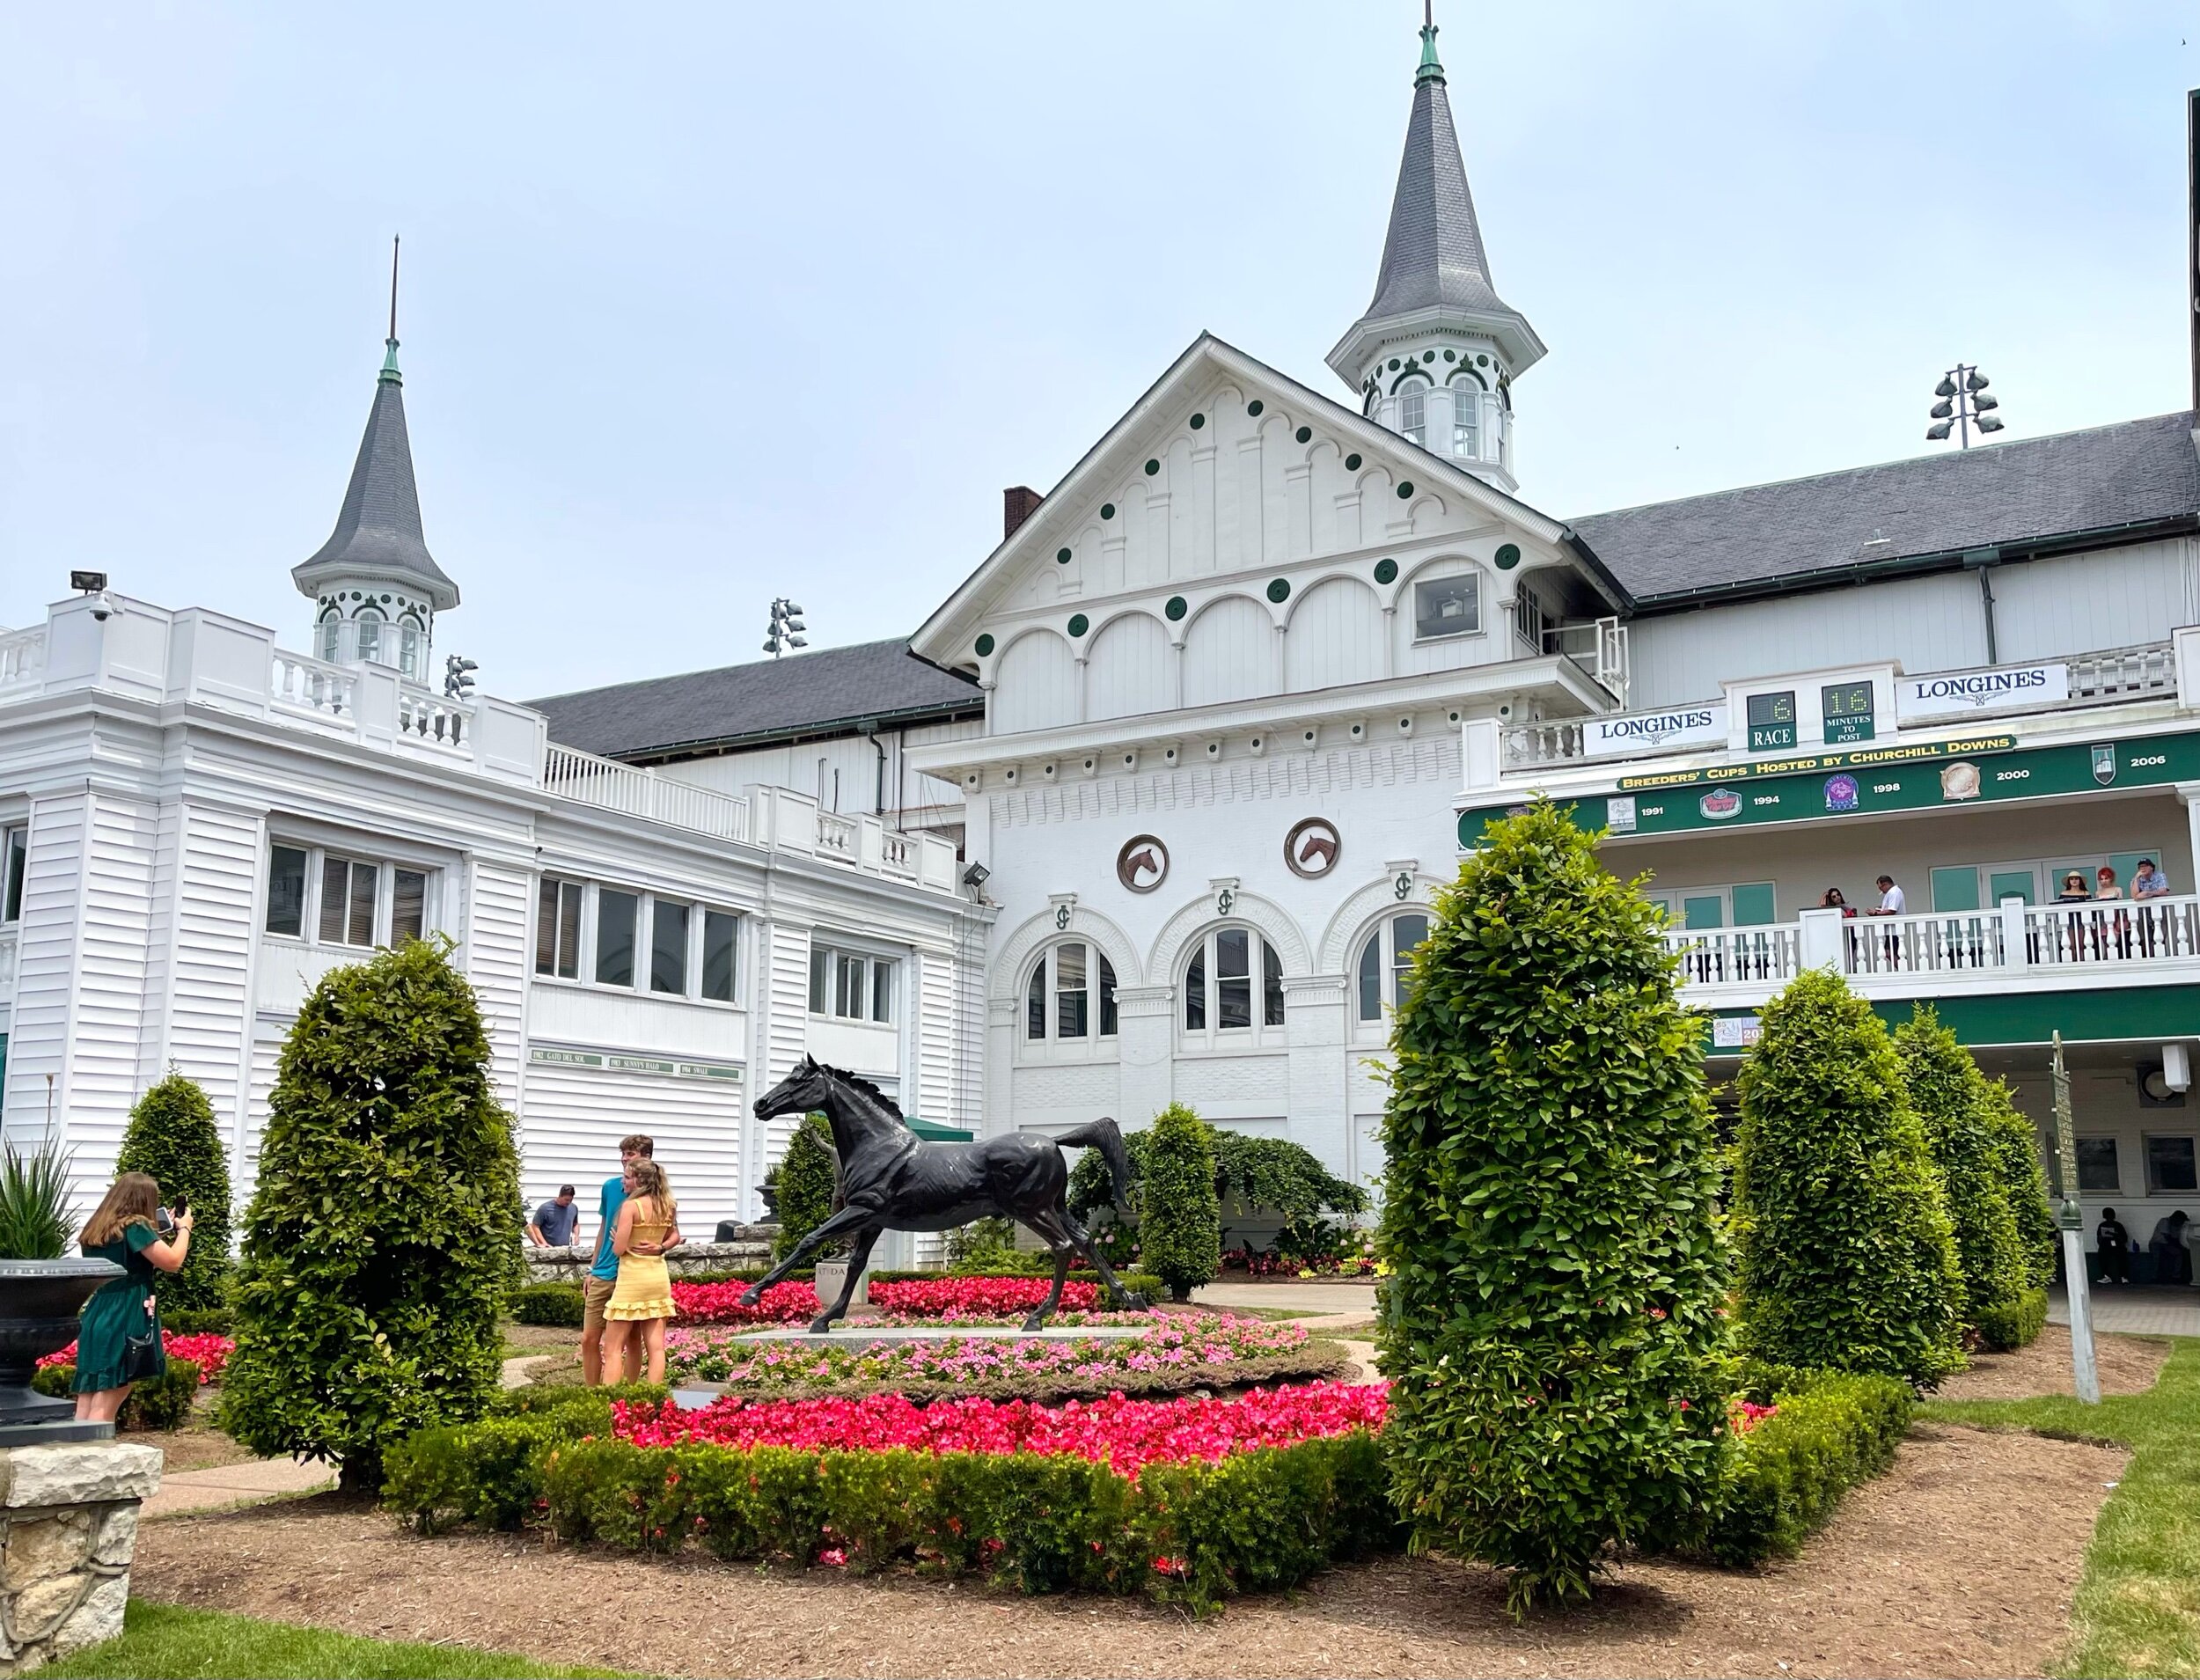  If you're not familiar,  Churchill Downs  is the horse racing complex in Louisville, Kentucky, famed for hosting the annual  Kentucky Derby . The Kentucky Derby is known as  The Most Exciting Two Minutes in Sports    and is the oldest continuously h